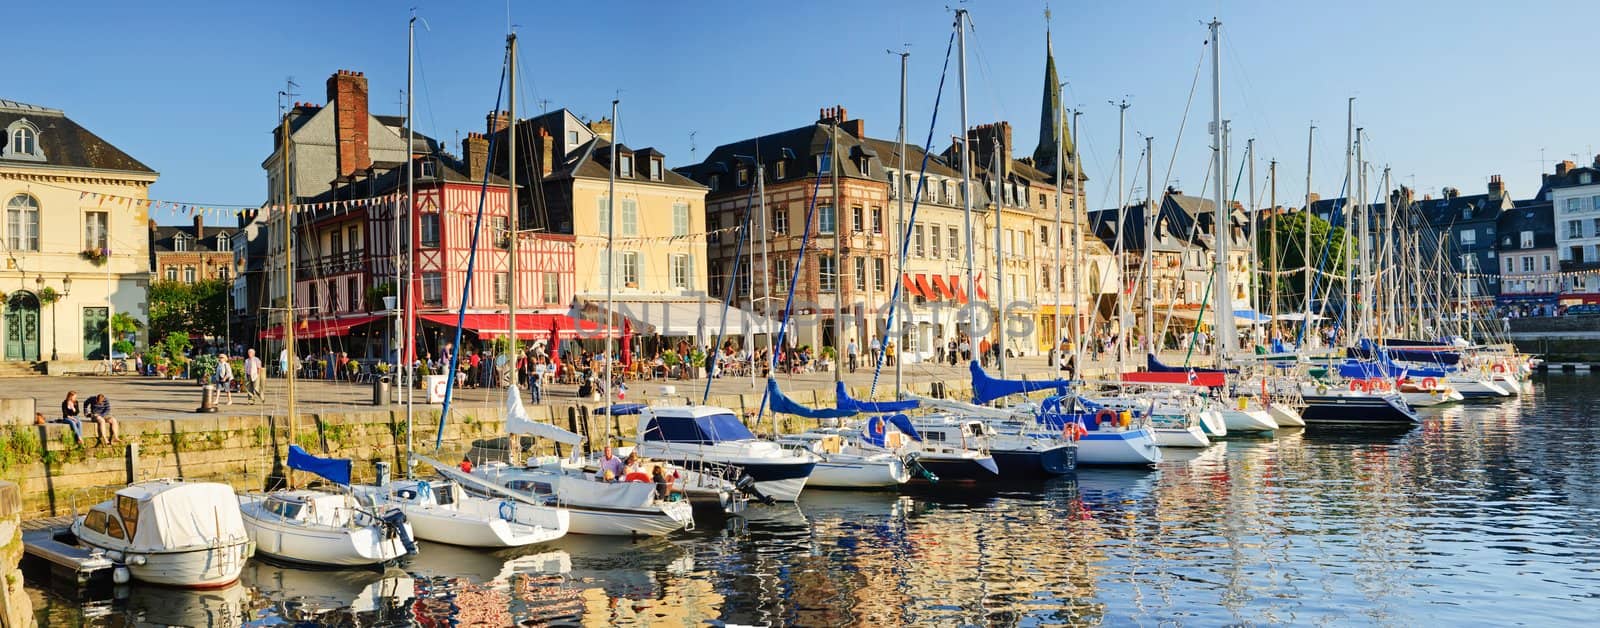 Panorama. Sunset in Honfleur. View of the old harbor - boats, houses